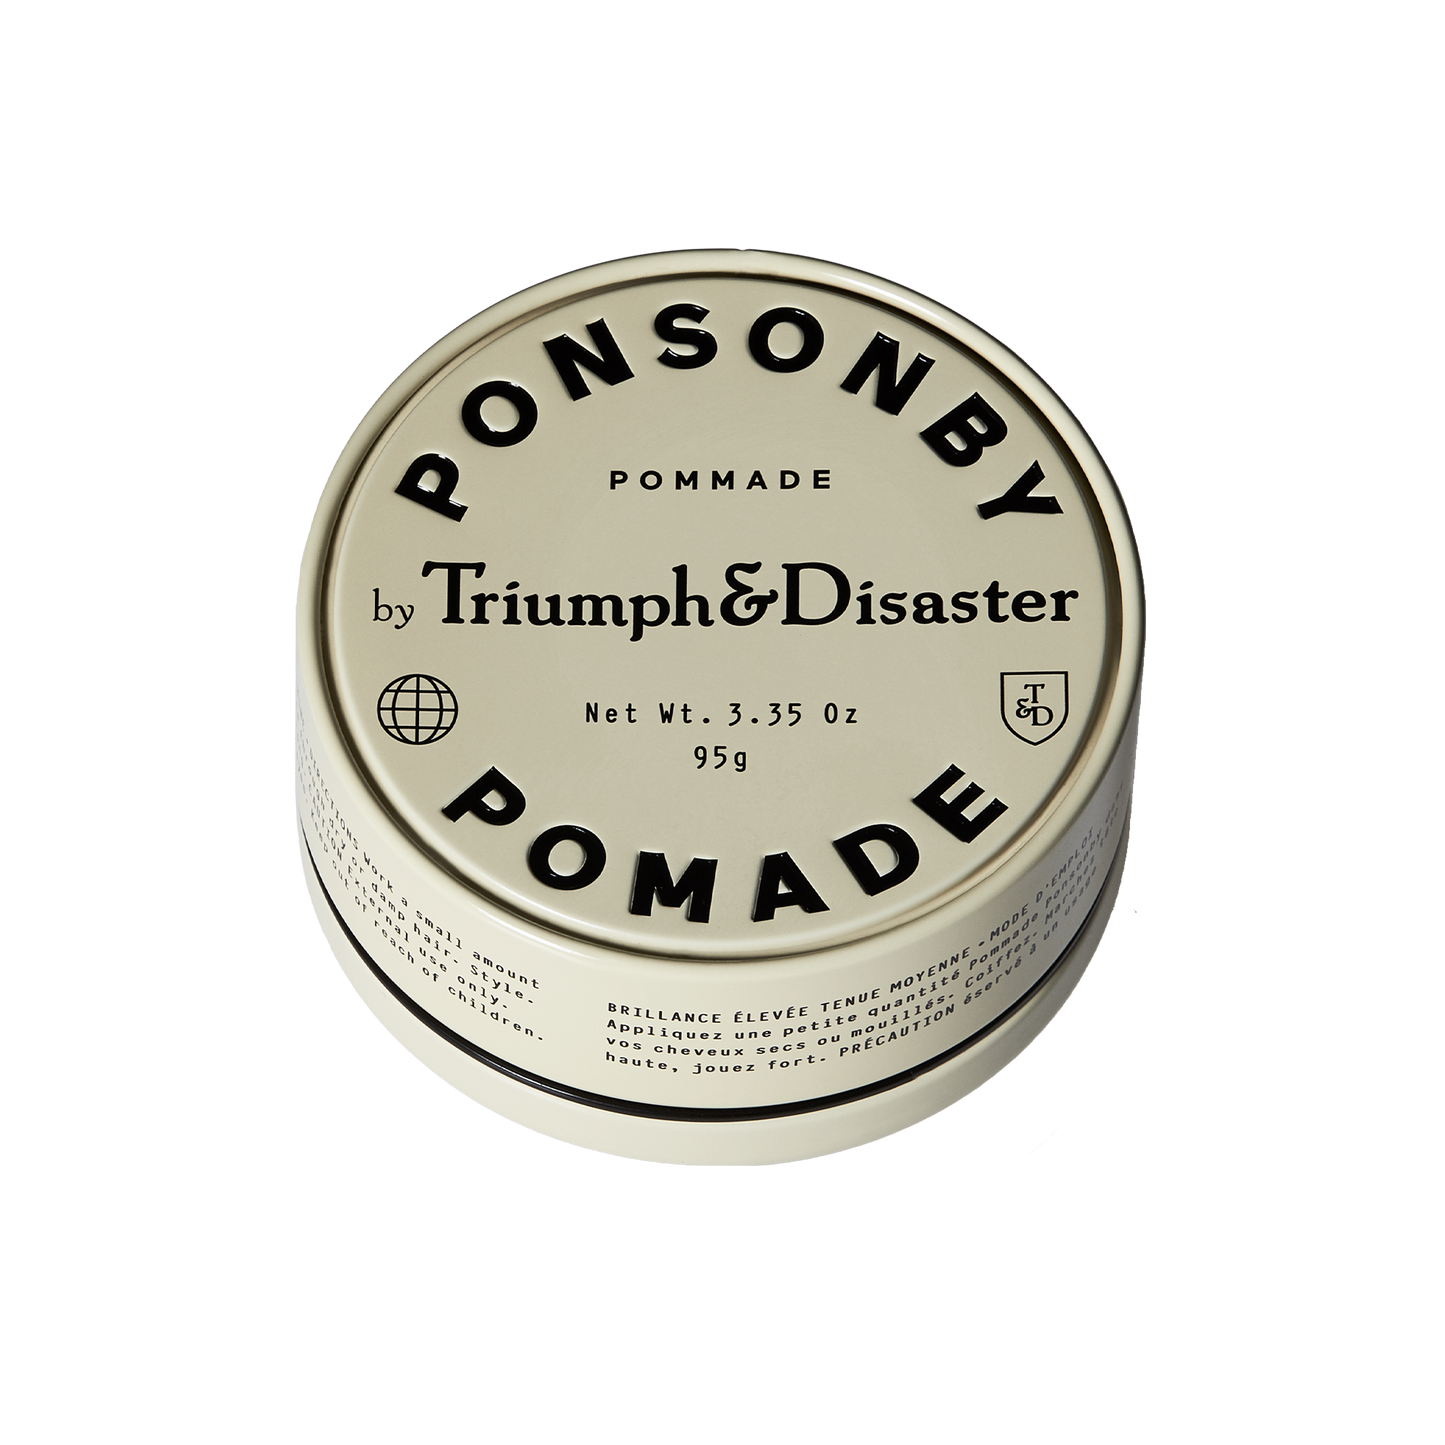 Triumph and Disaster Ponsonby Pomade: Sangre de cargo or 'Dragon’s Blood' is a natural tree resin that combines with Harakeke to treat and balance the scalp while Argan oil attacks split ends and promotes healthy hair growth - in one wave of the metaphorical comb, Ponsonby Pomade is redefining the category, proving that a pomade can both style your hair while also protecting it from damage, calming the scalp with natural, active ingredients that leave both hair & scalp feeling clean and healthy.